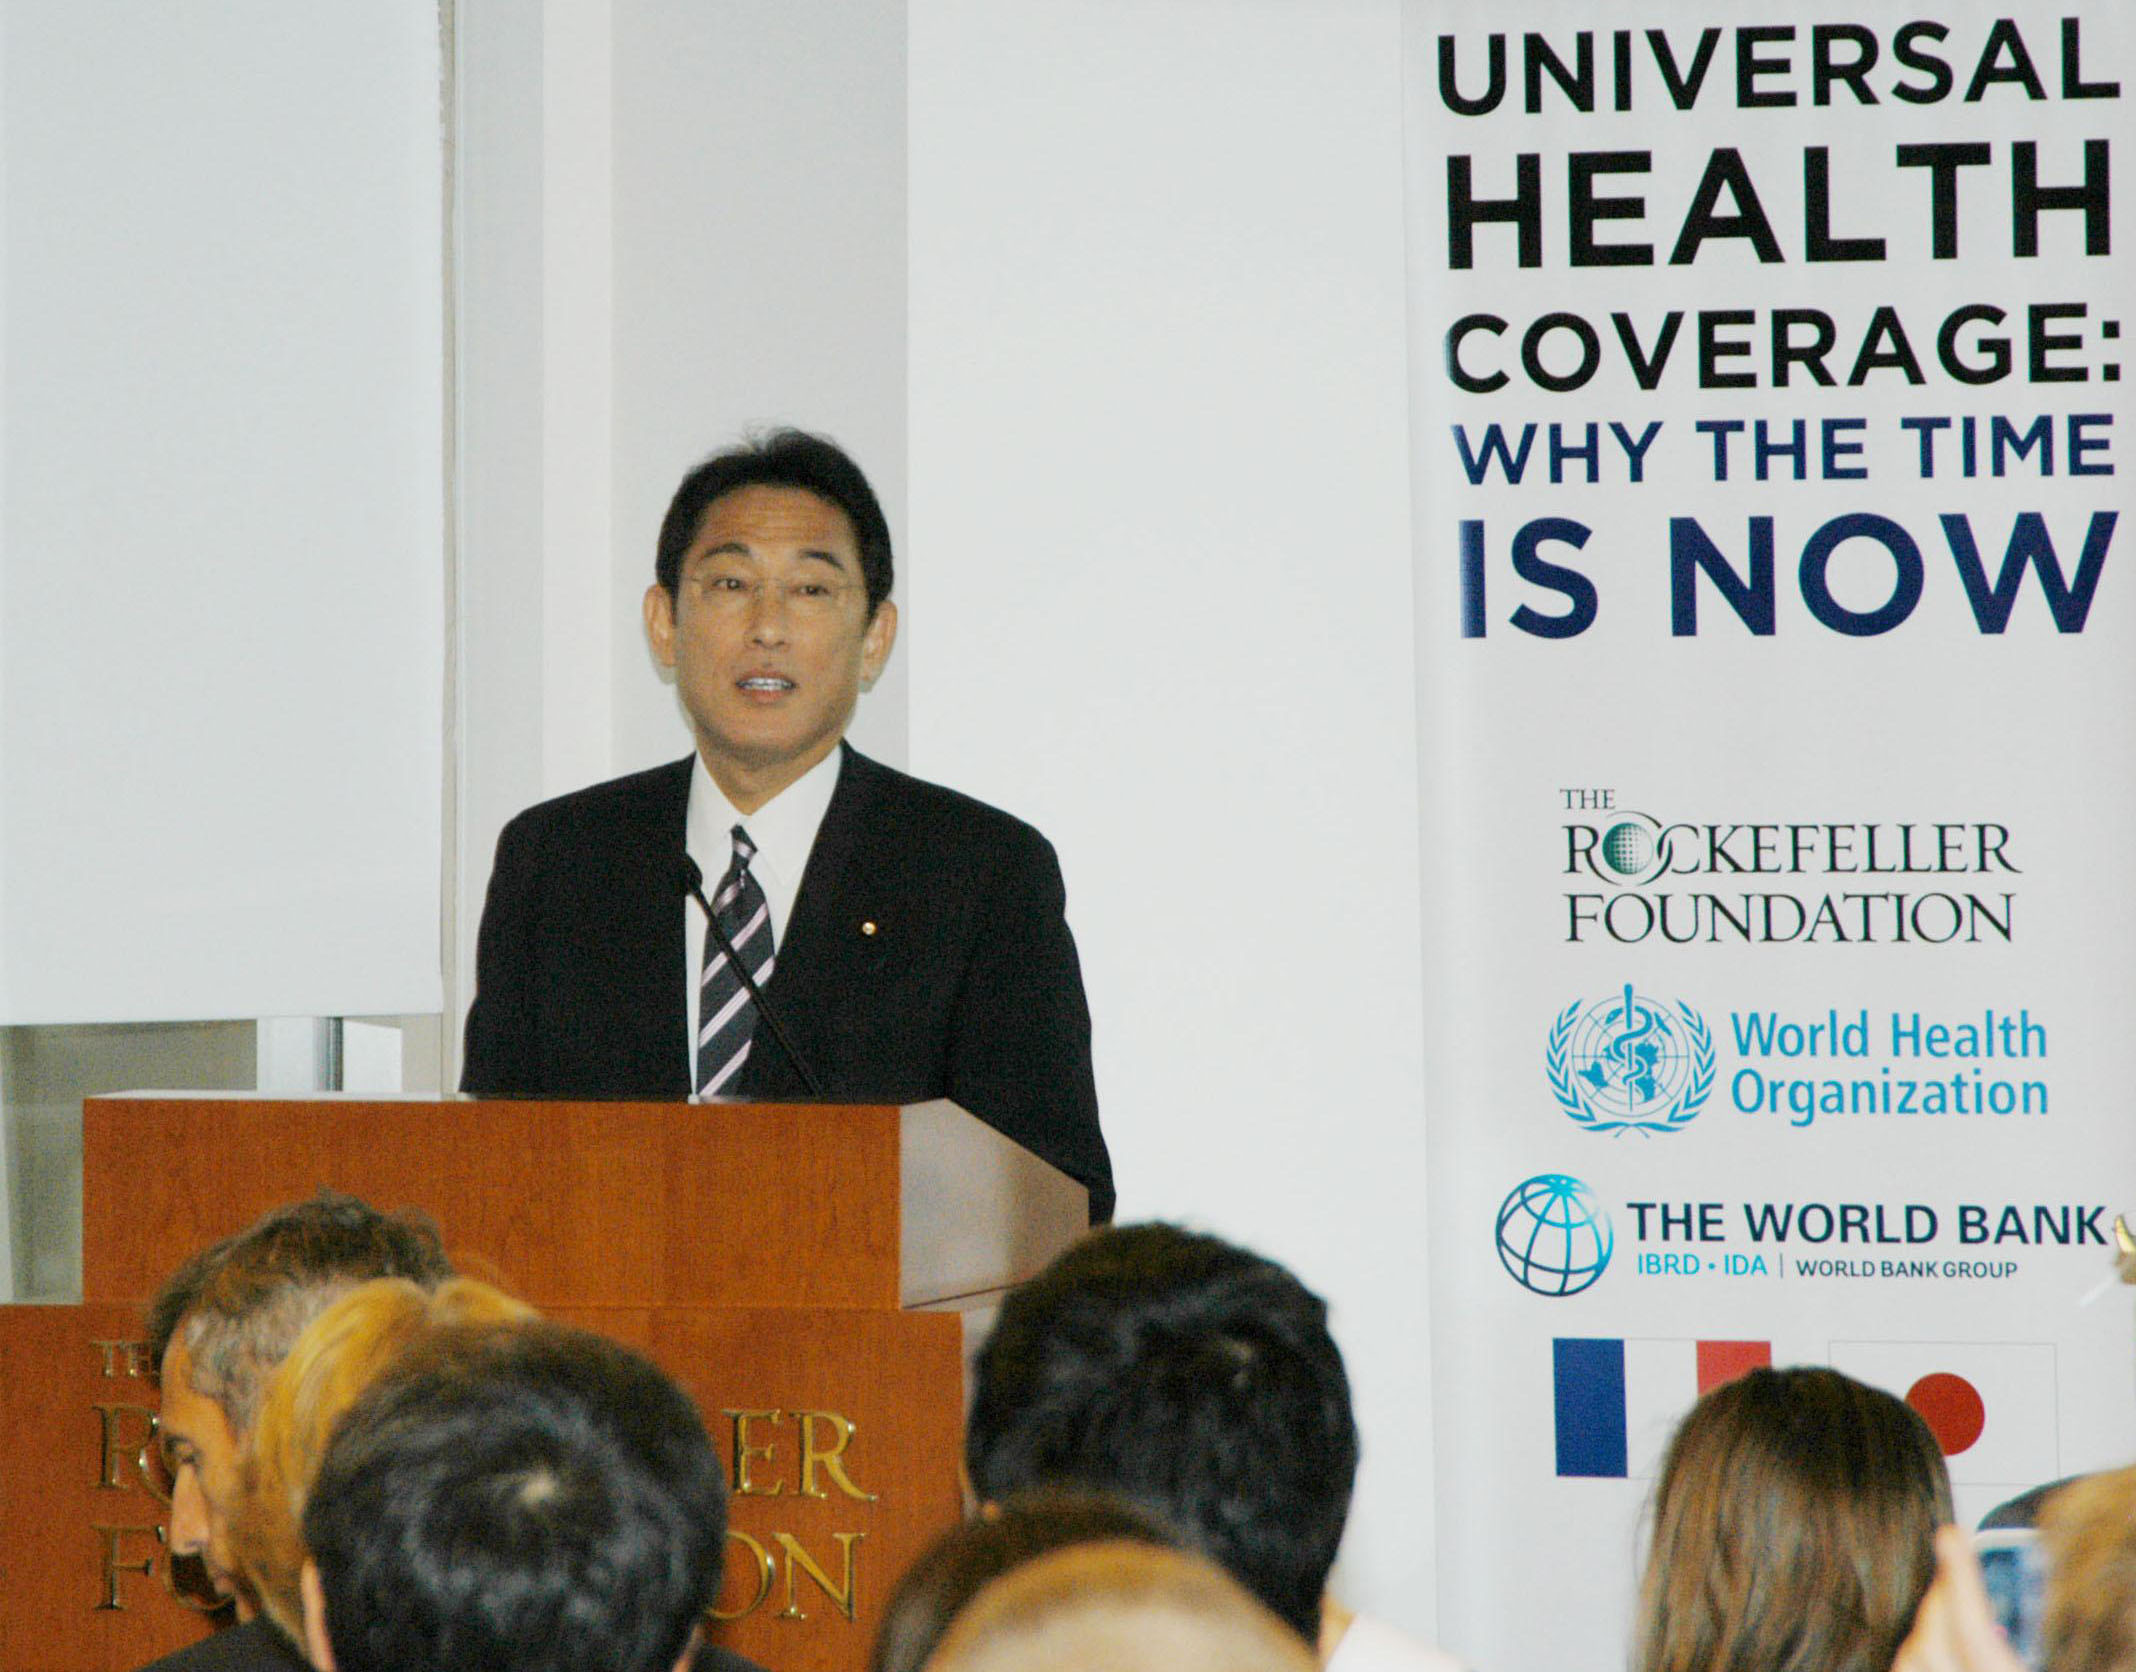 Foreign Minister Fumio Kishida addresses the audience at a United Nations meeting on universal health coverage in New York on Monday. | KYODO